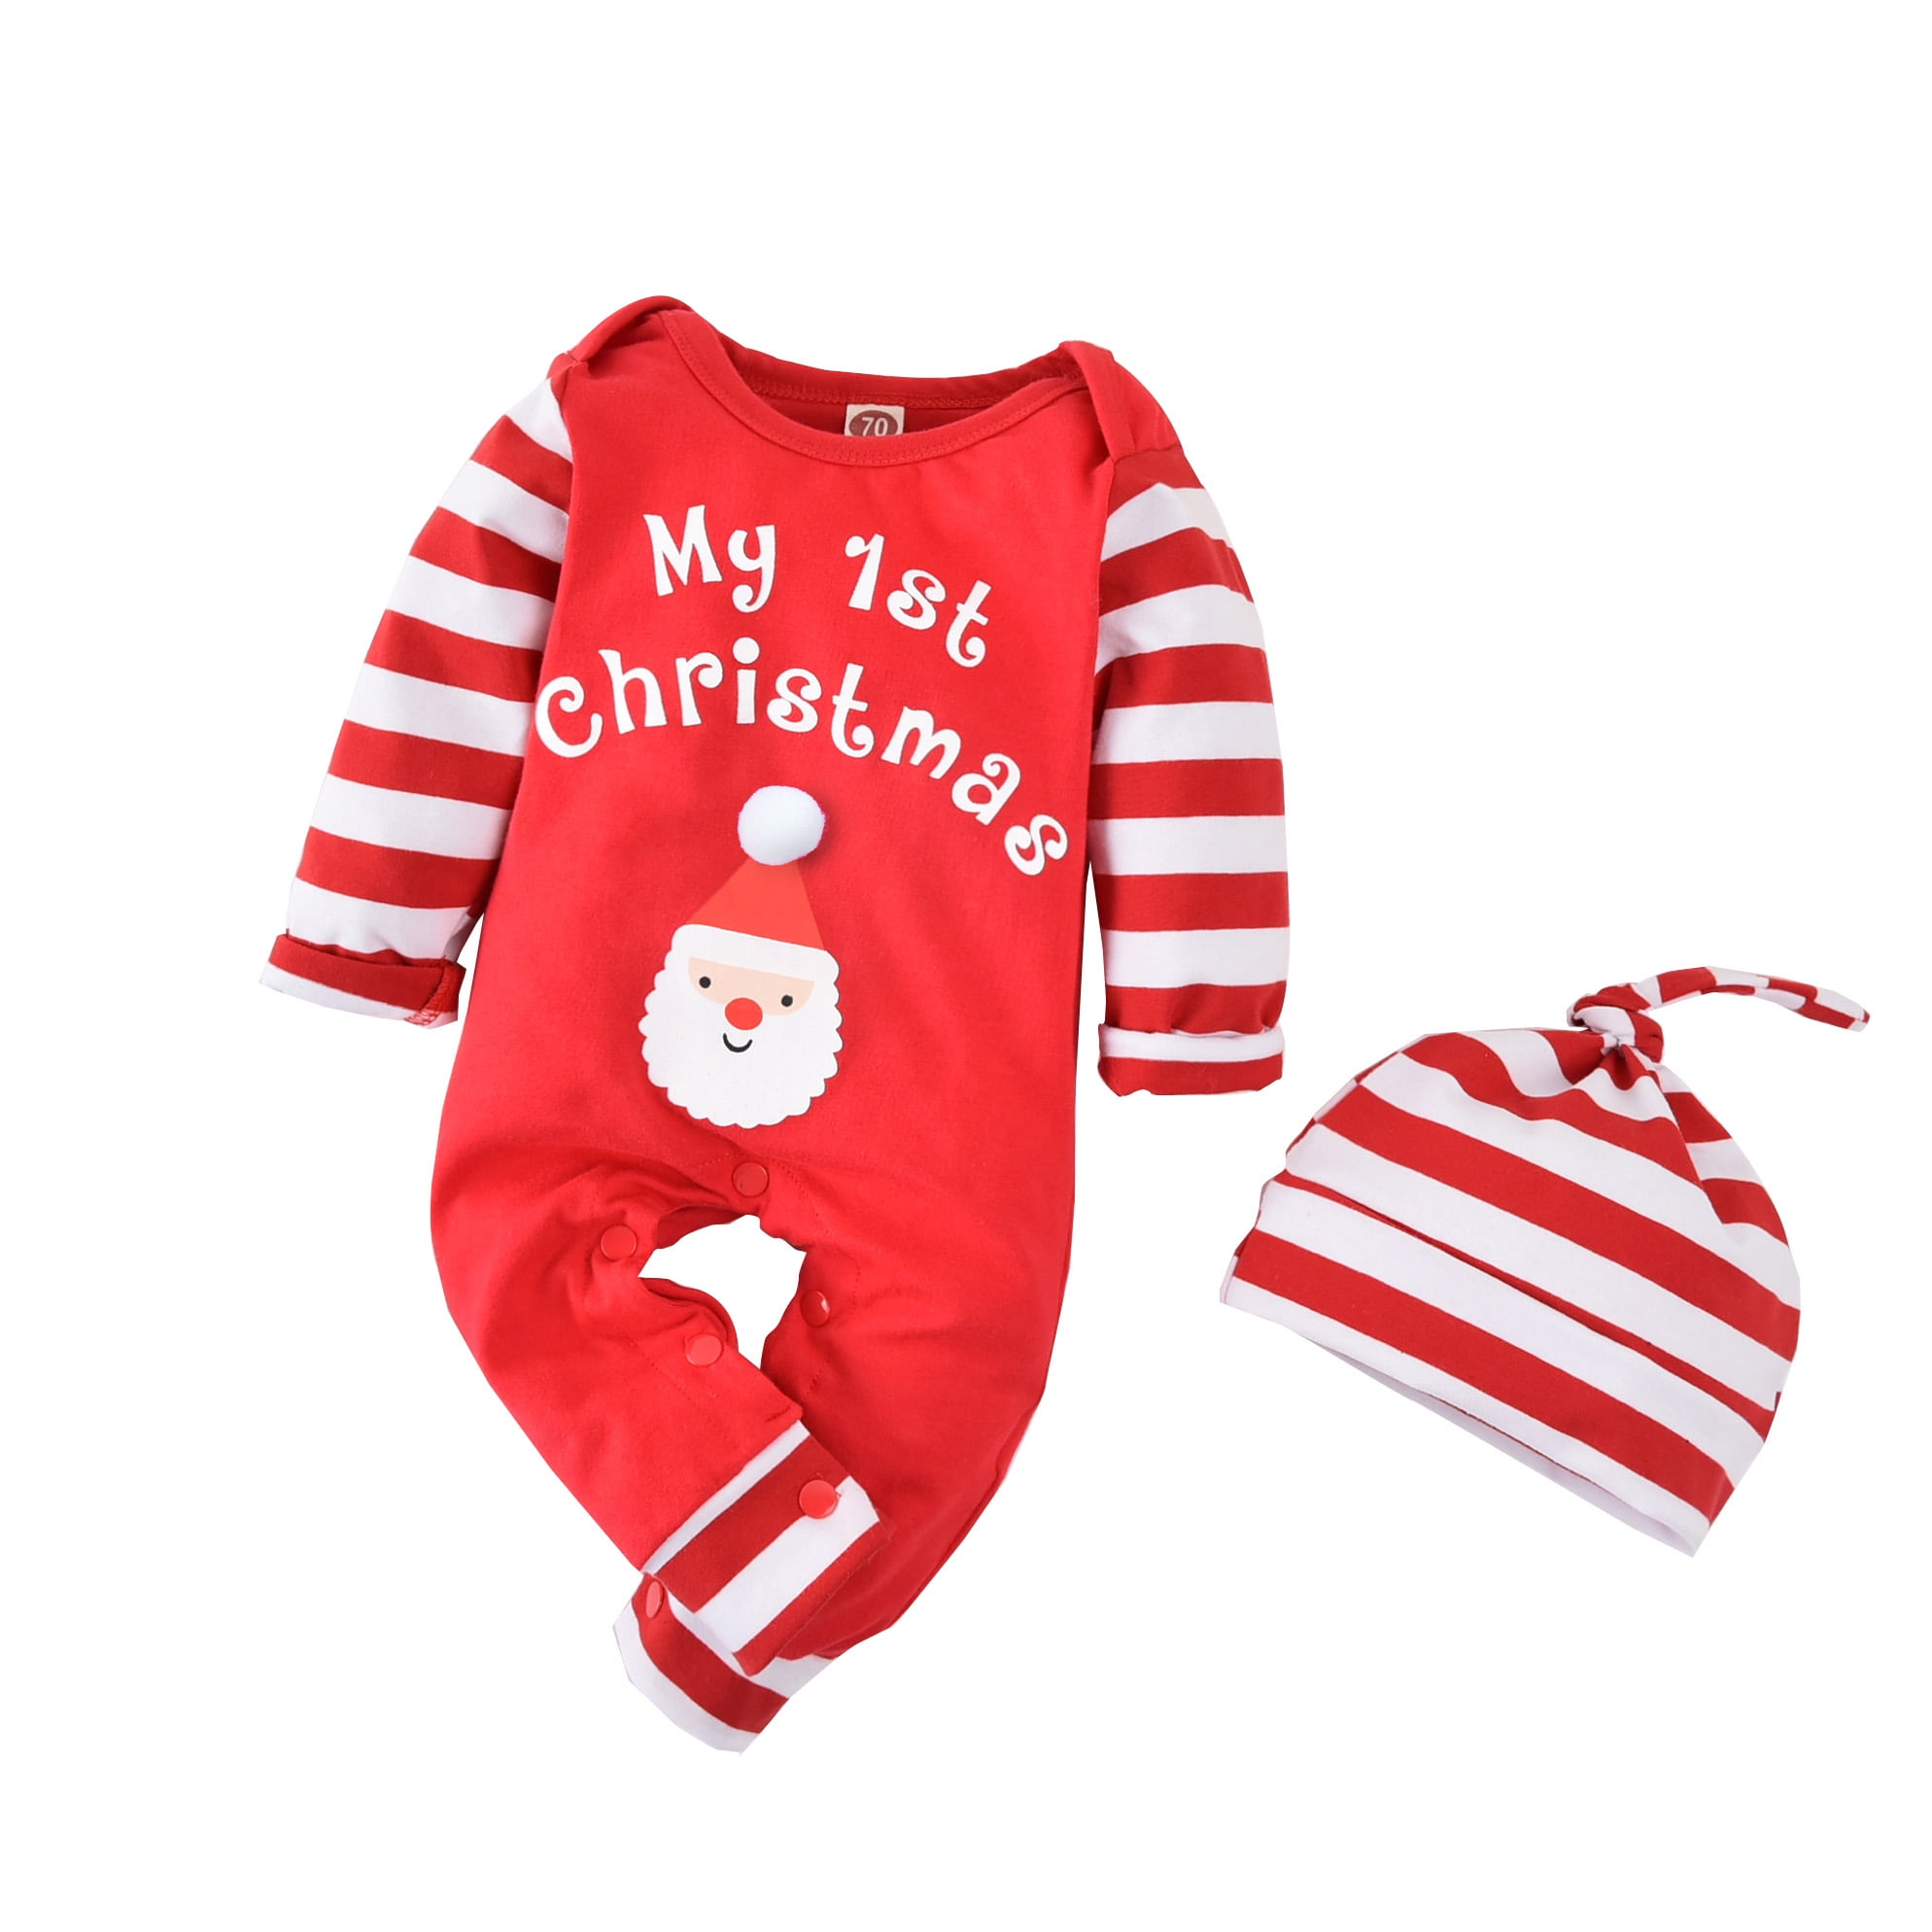 Carters Baby's First Christmas Santa Infant Sleeper SIZES Newborn, 3 Months 